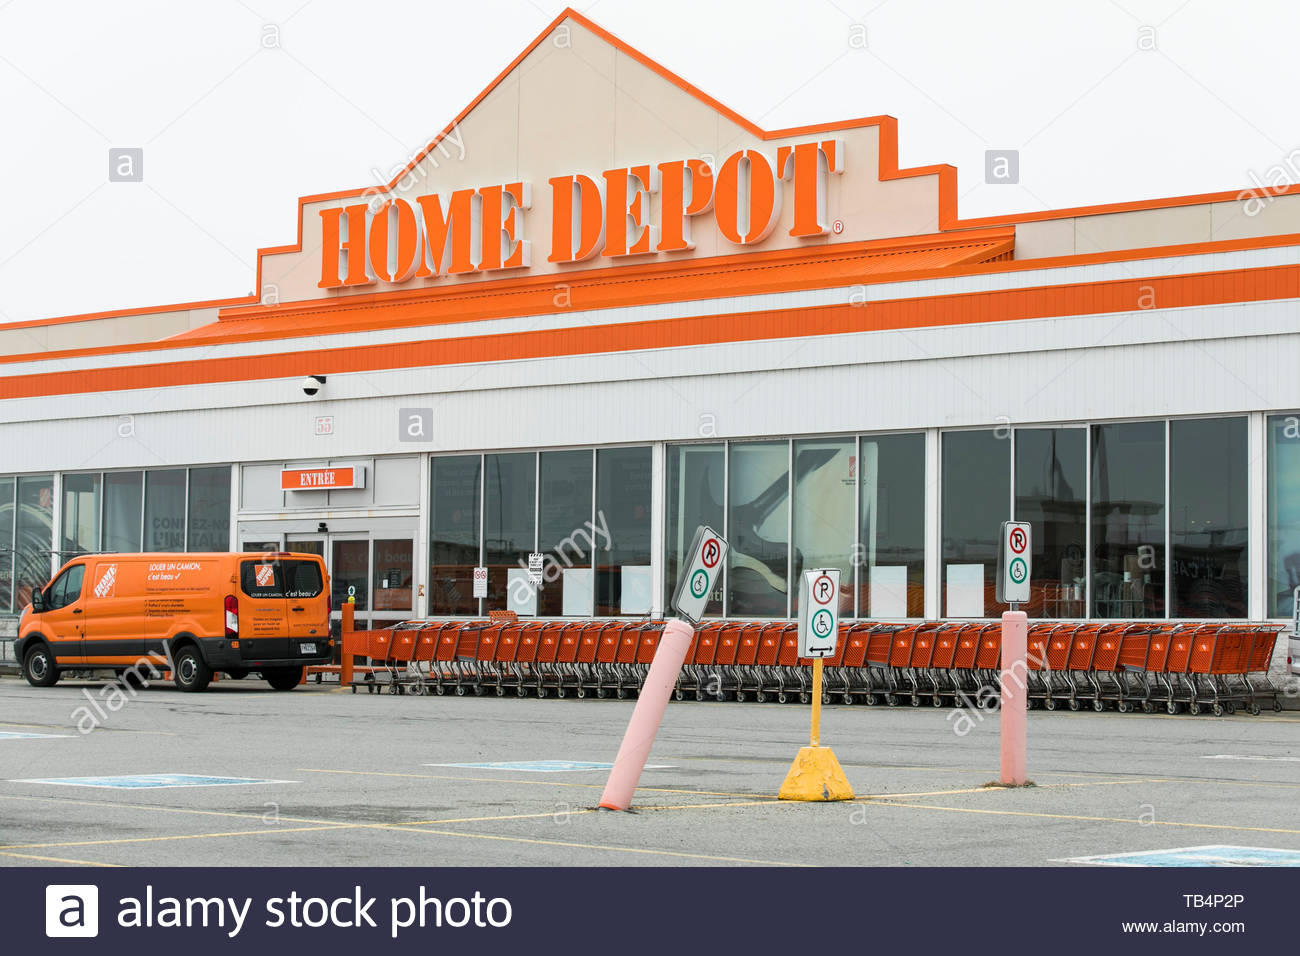 a logo sign outside of a home depot retail store location in vaudreuil dorion quebec canada on april 21 2019 TB4P2P